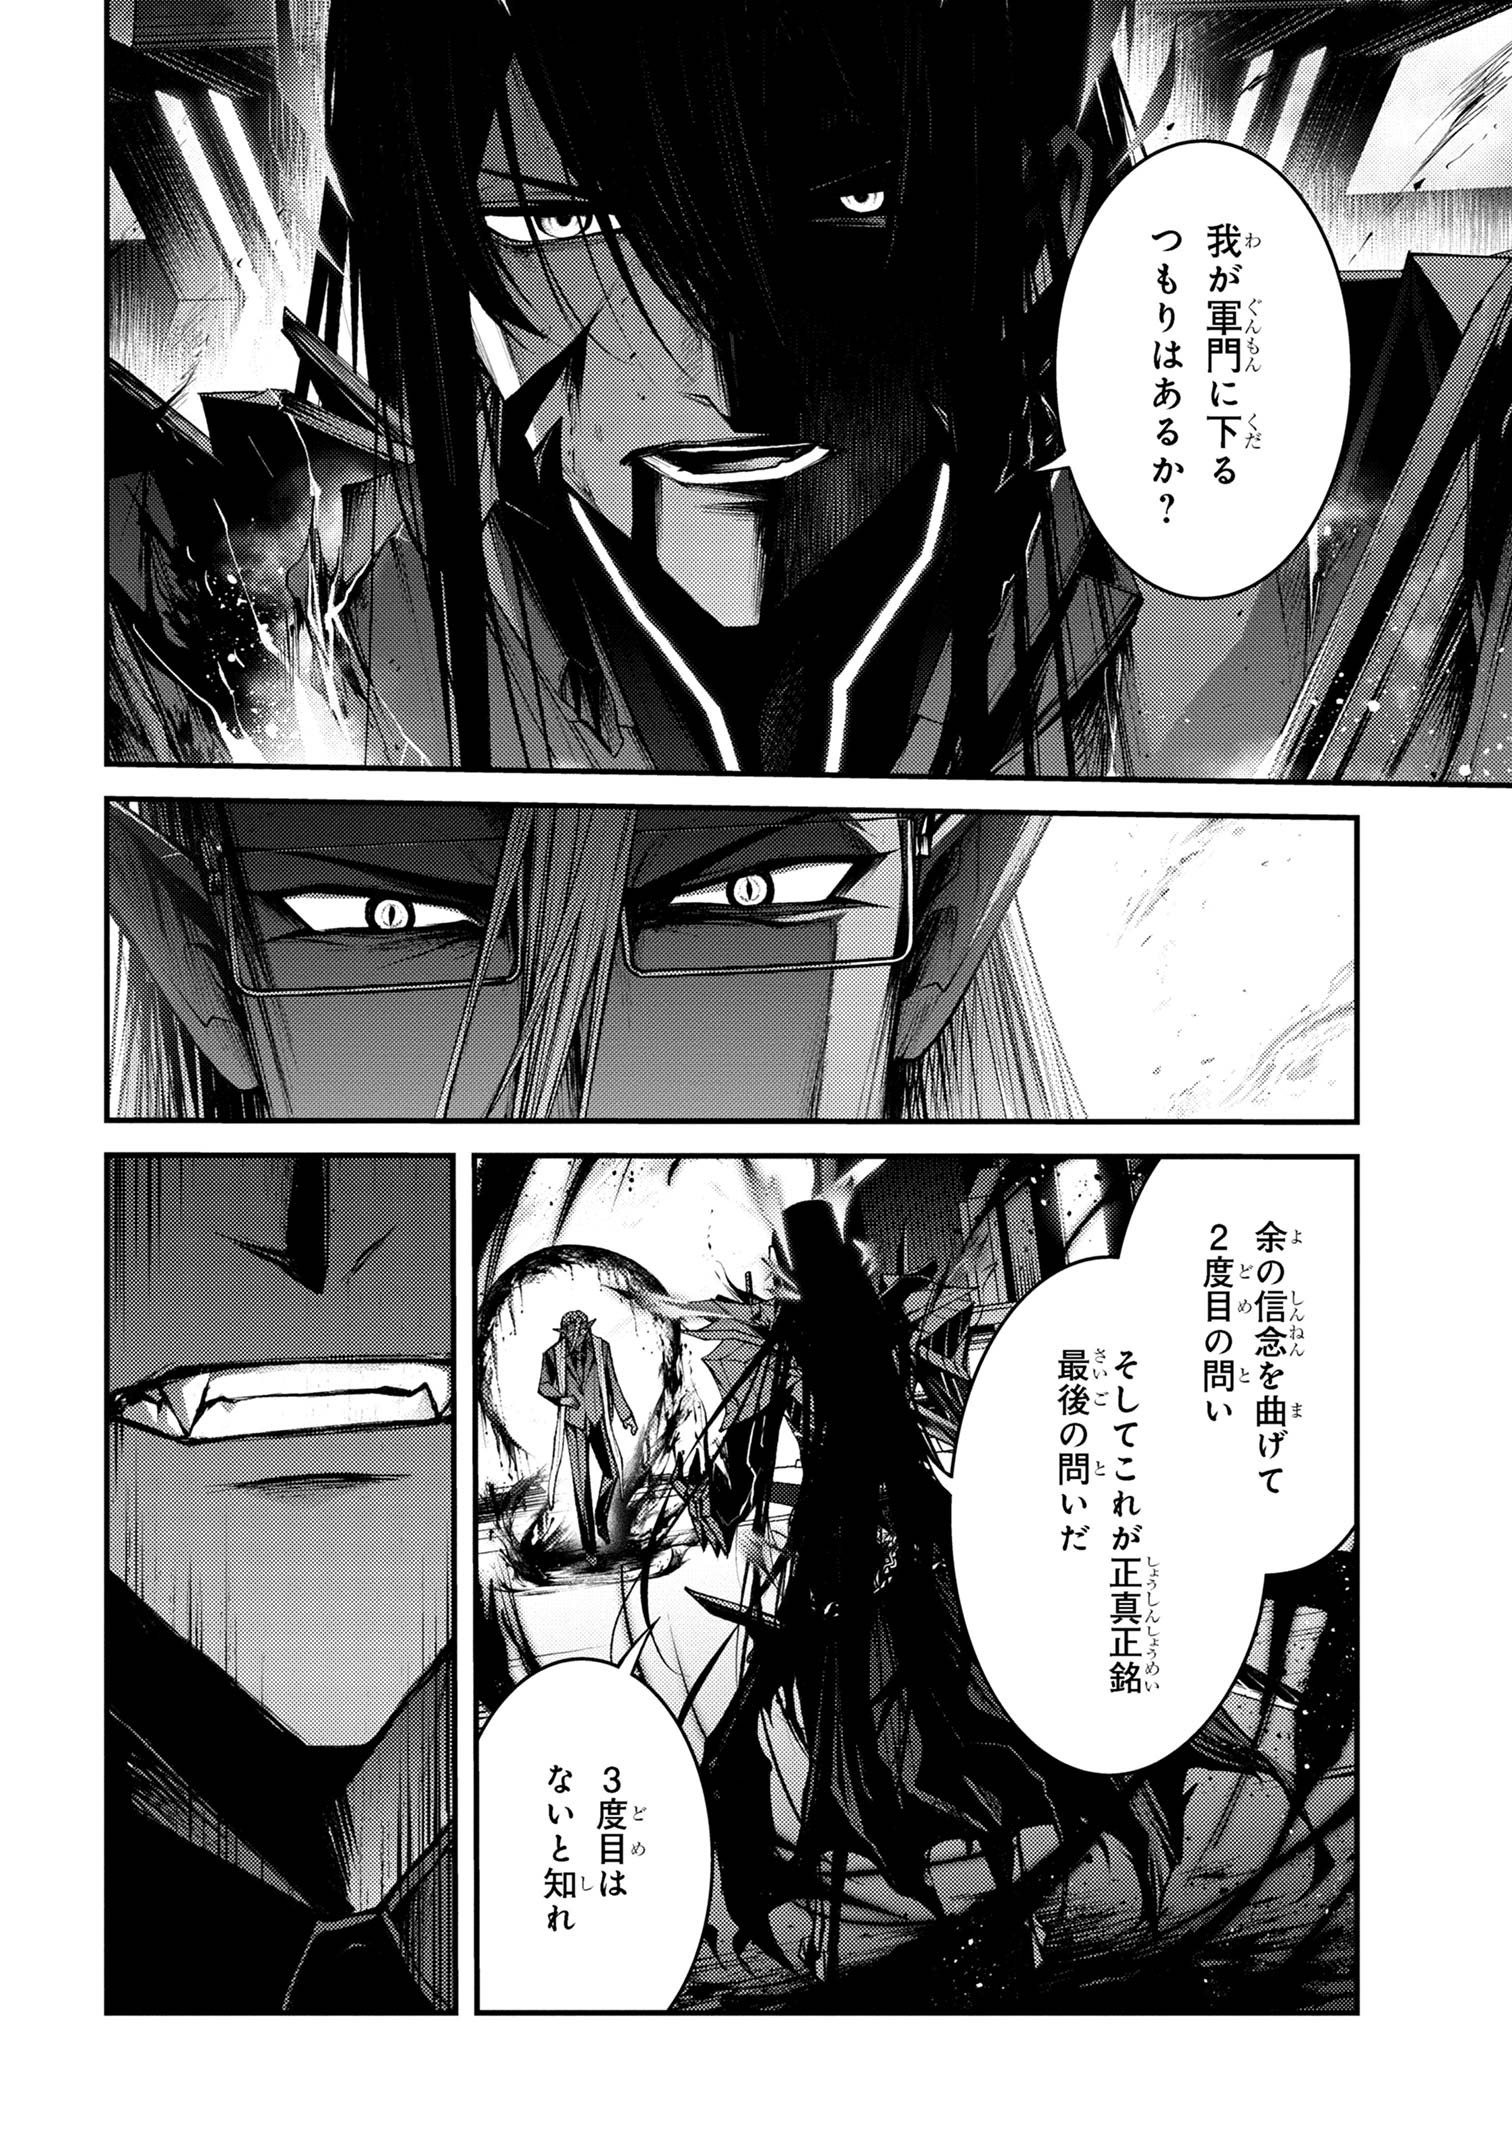 Maou 2099 - Chapter 13.1 - Page 2